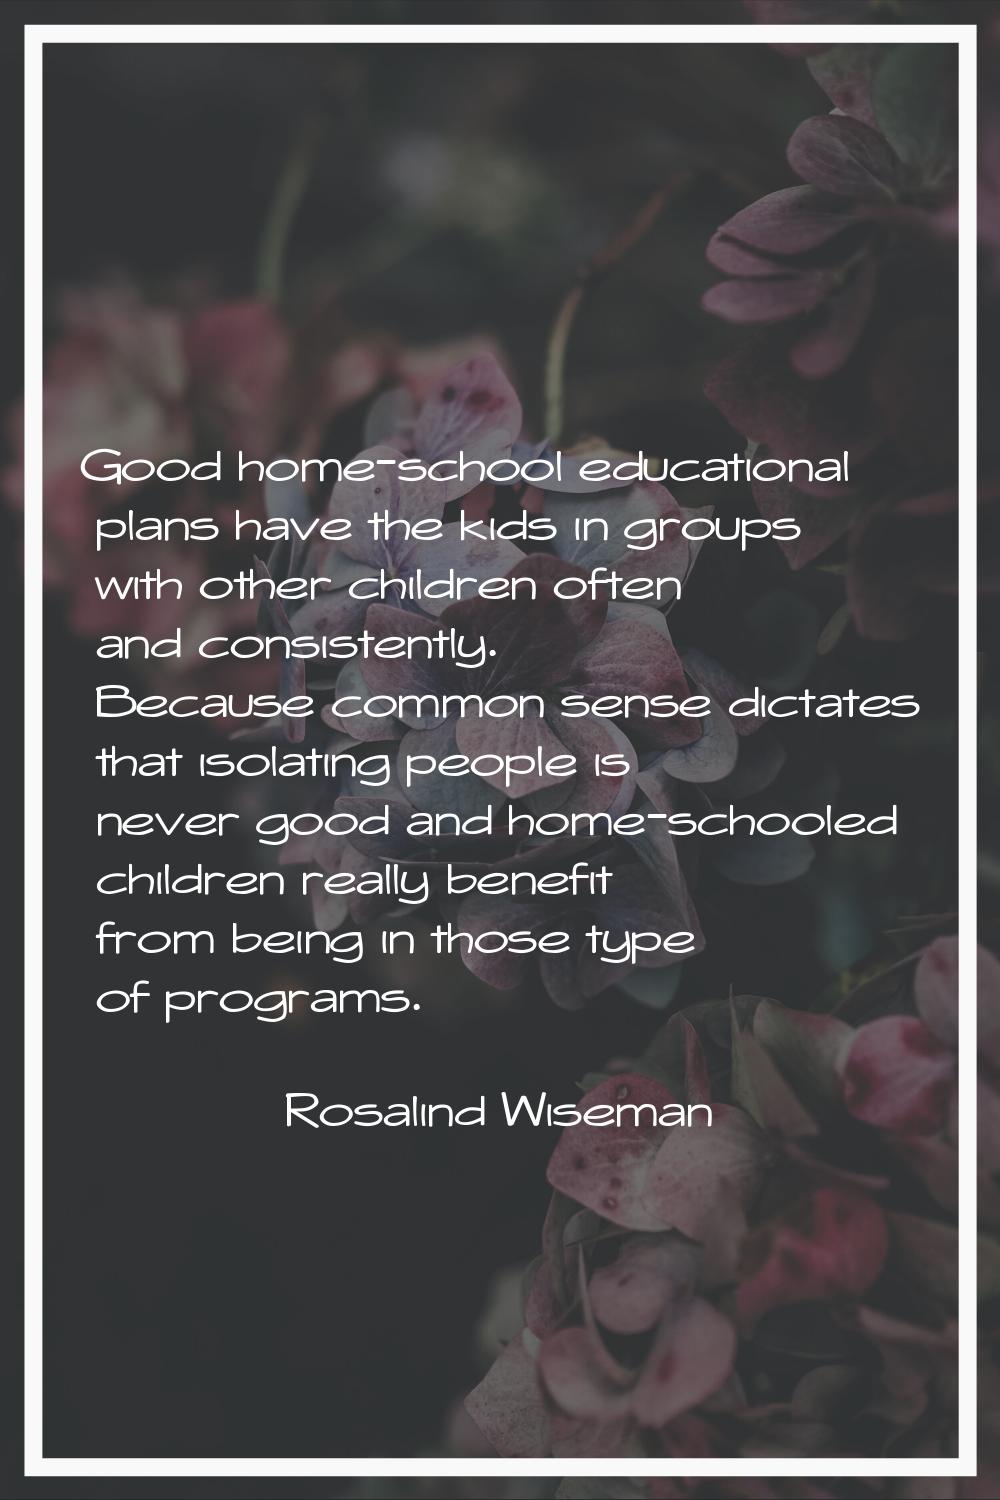 Good home-school educational plans have the kids in groups with other children often and consistent